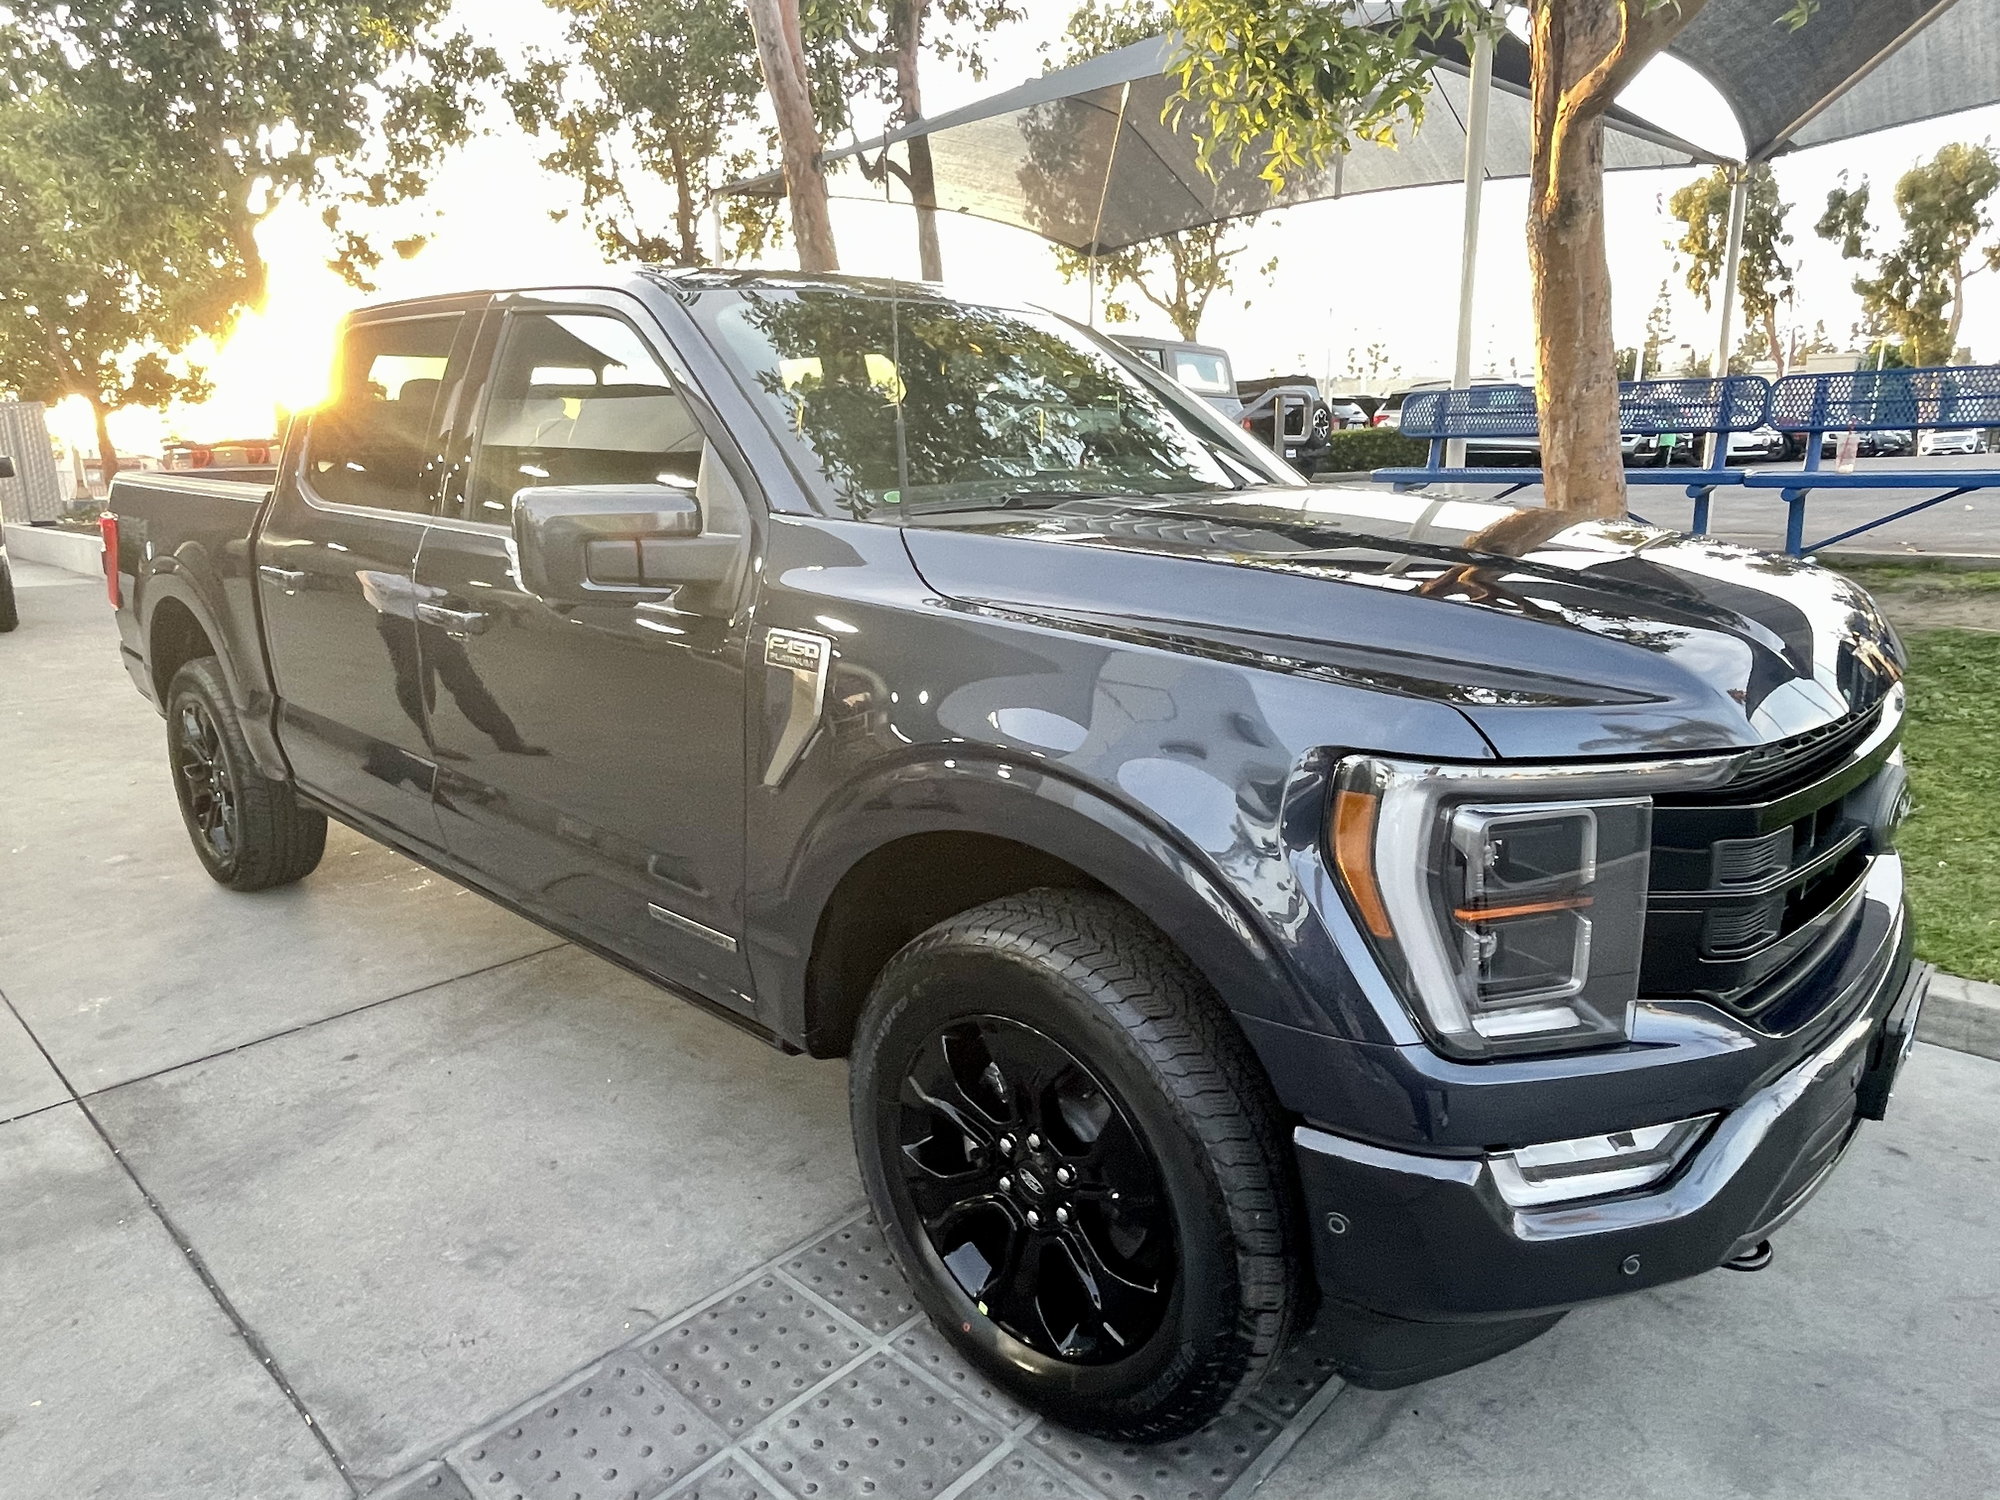 2022 Black Appearance Package Pictures Page 226 Ford F150 Forum